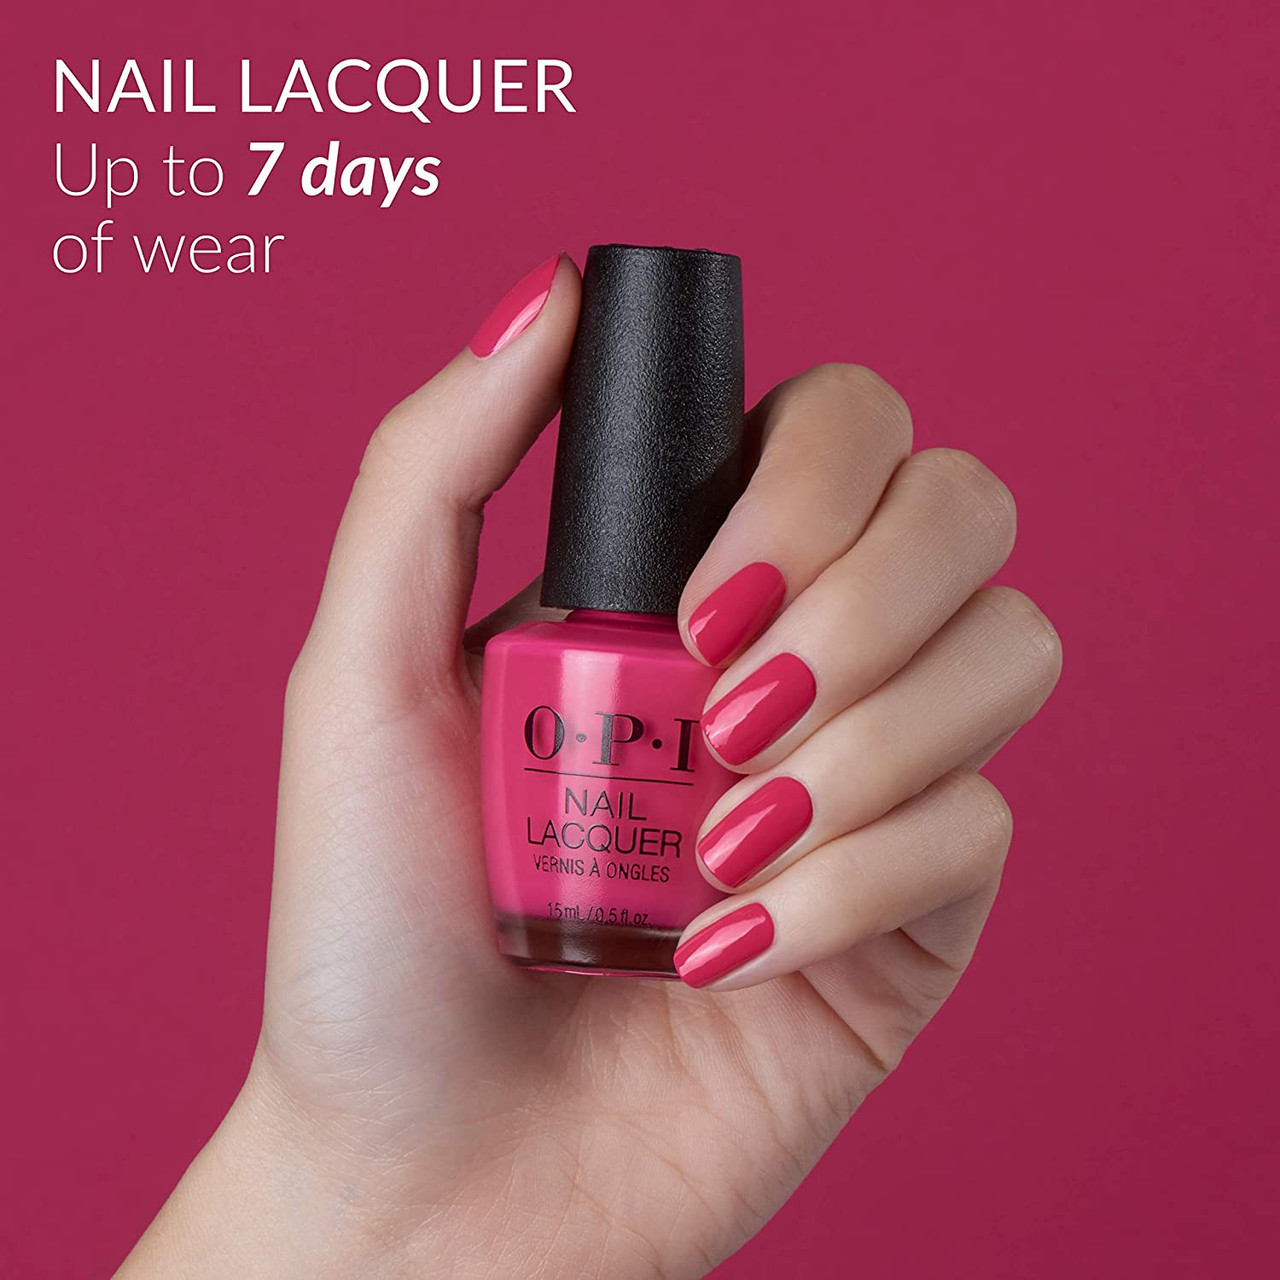 Opi Nail Lacquer Colors & Collection